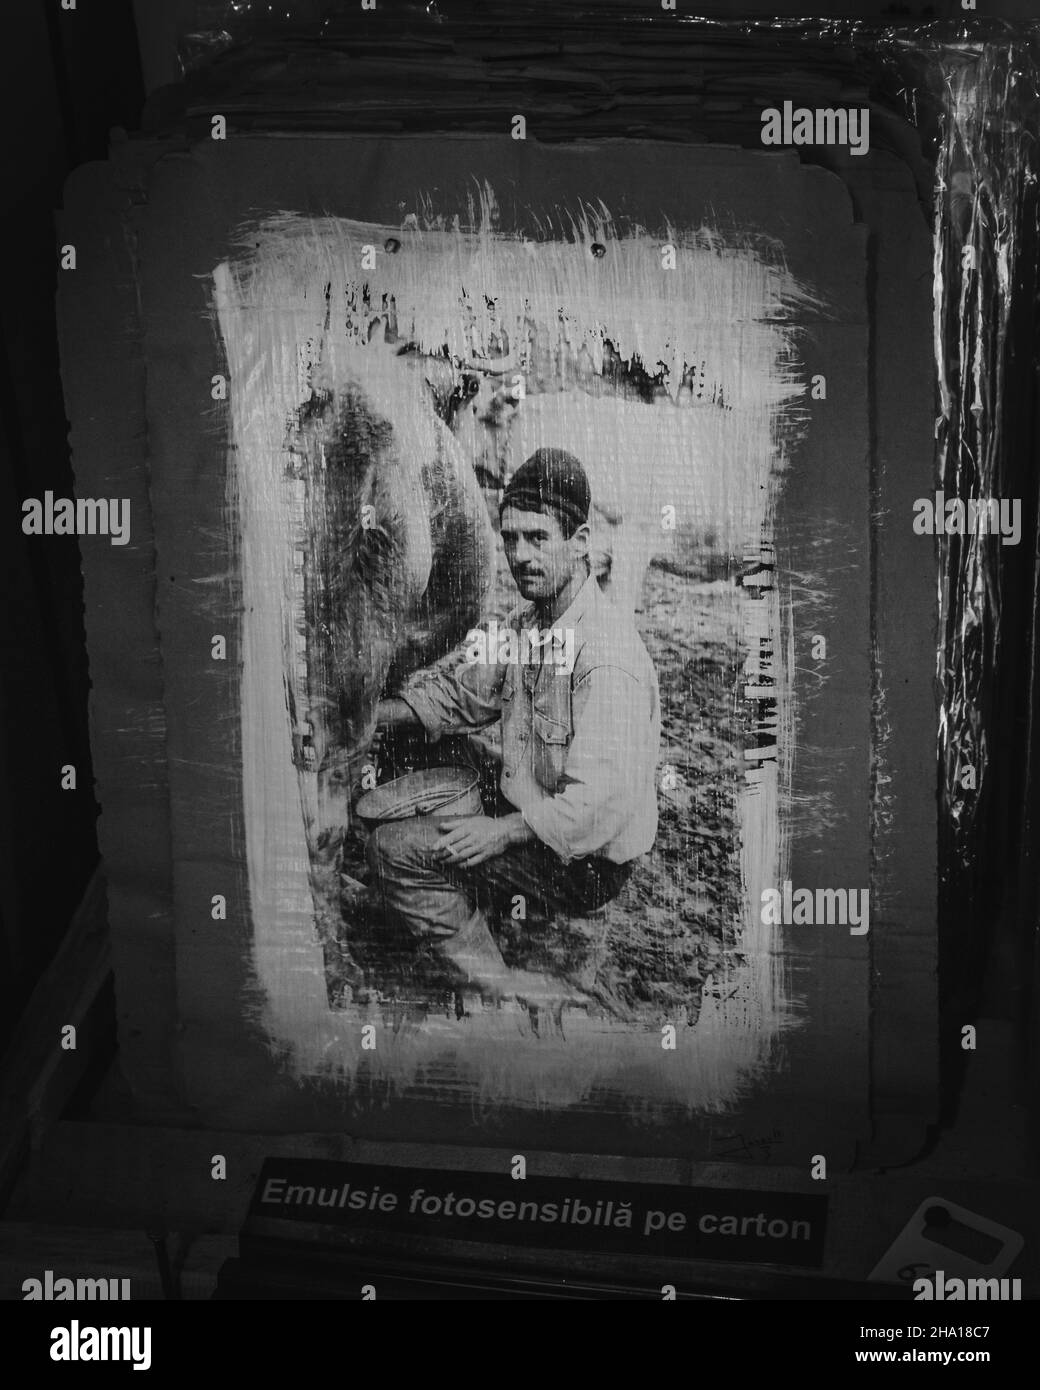 BUCHAREST, ROMANIA - Aug 25, 2021: A beautiful grayscale shot of a painting of a man on a farm Stock Photo